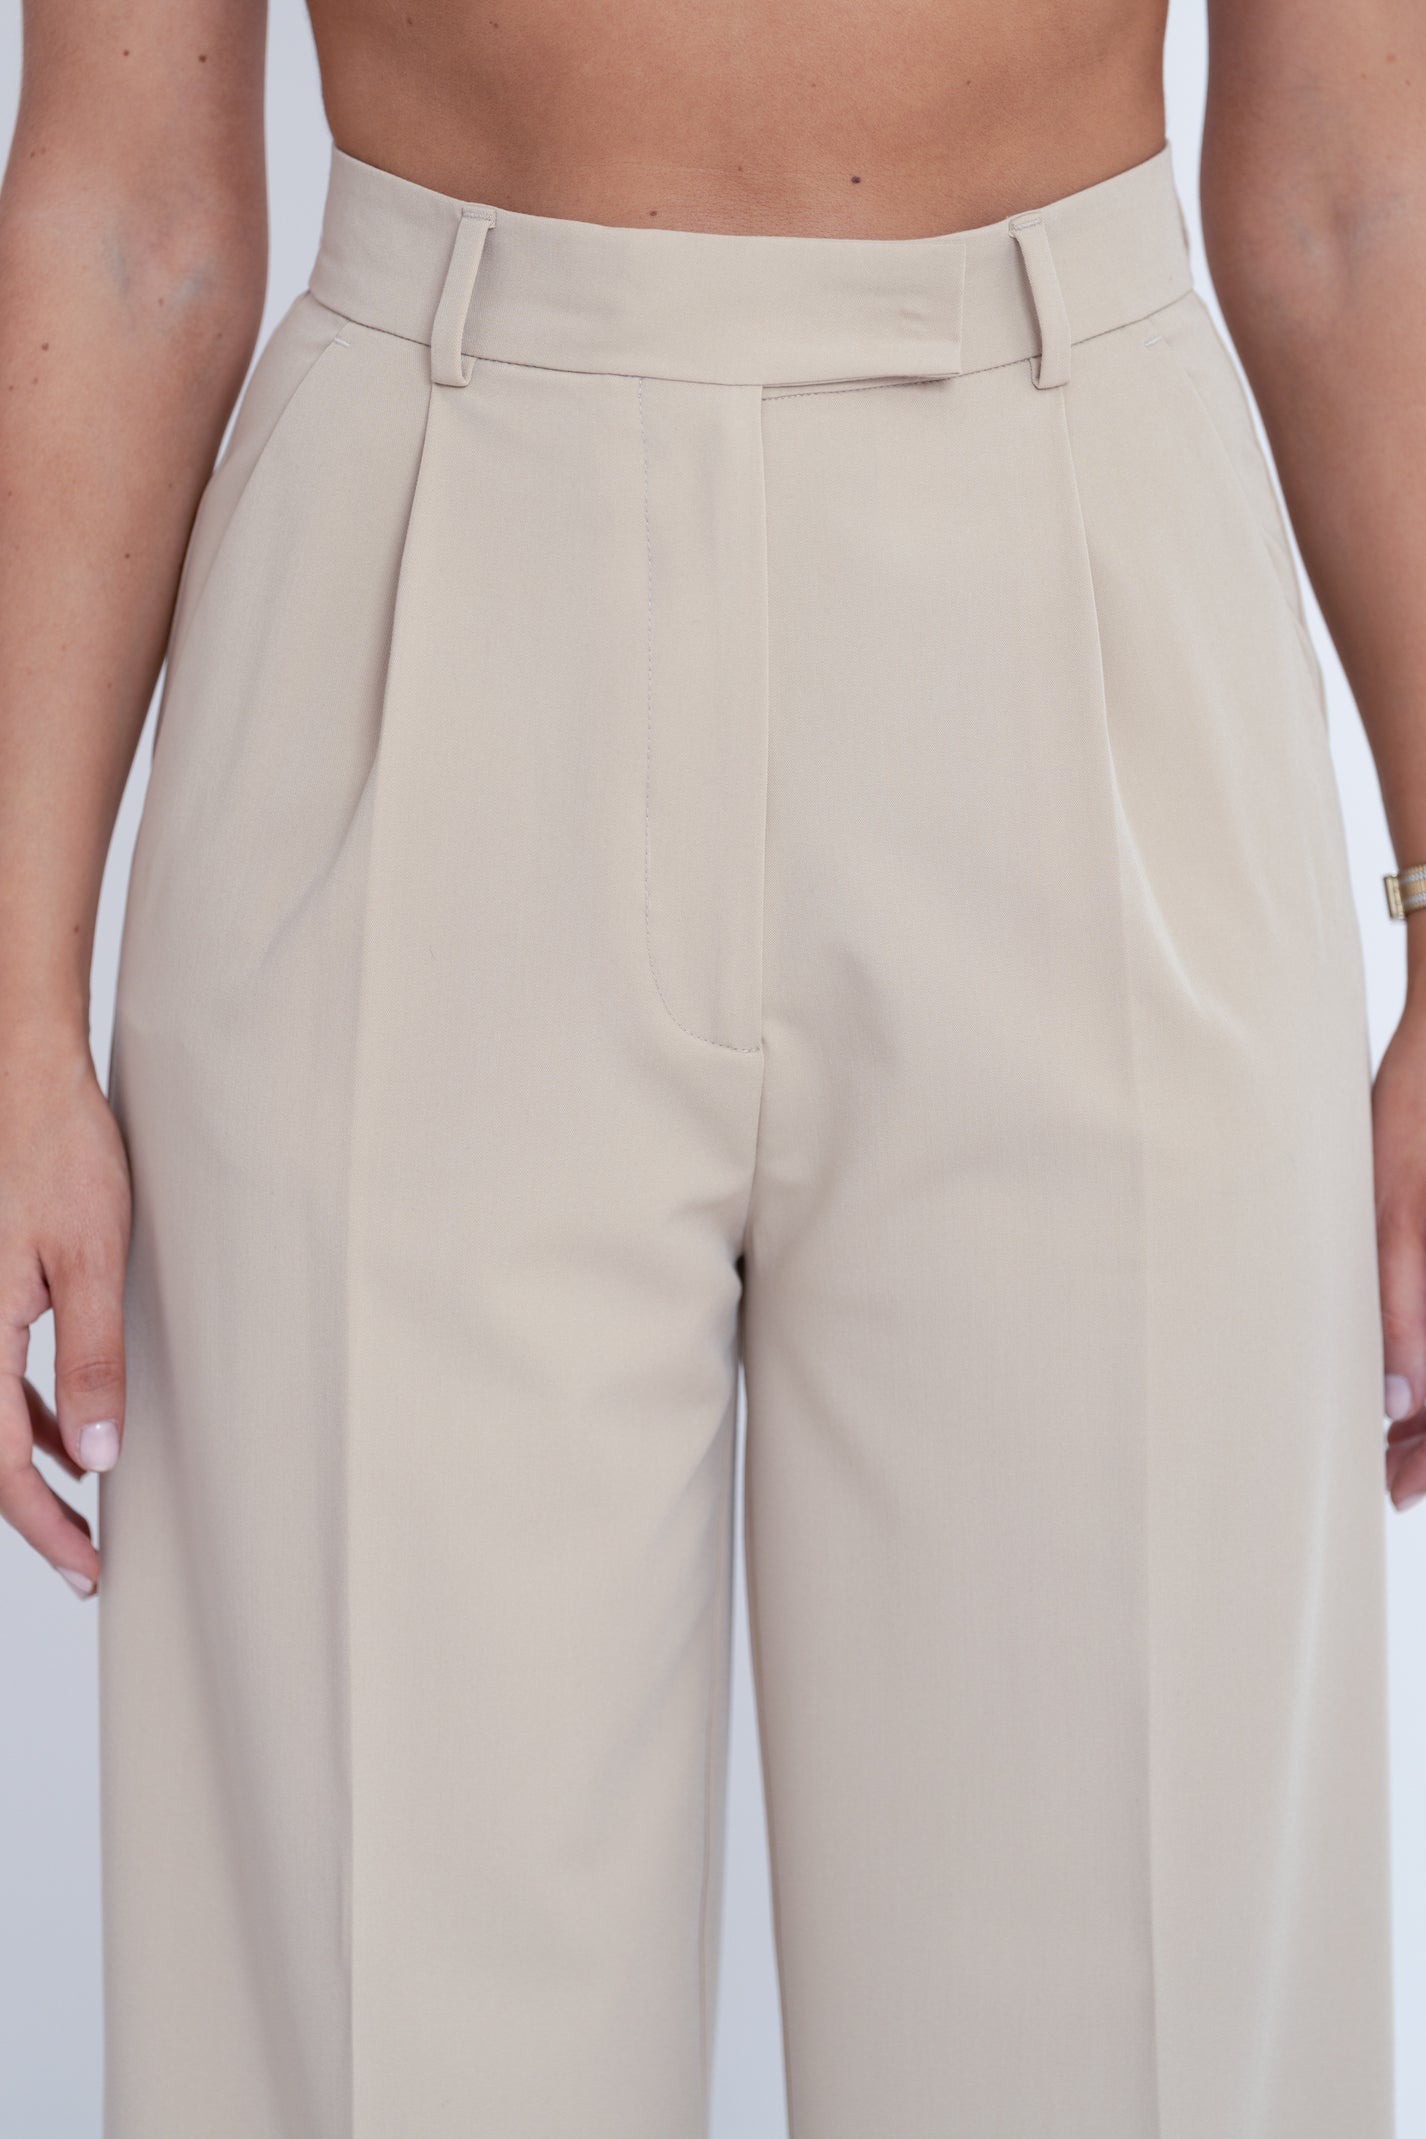 Jagger Tailored Trousers - Beige